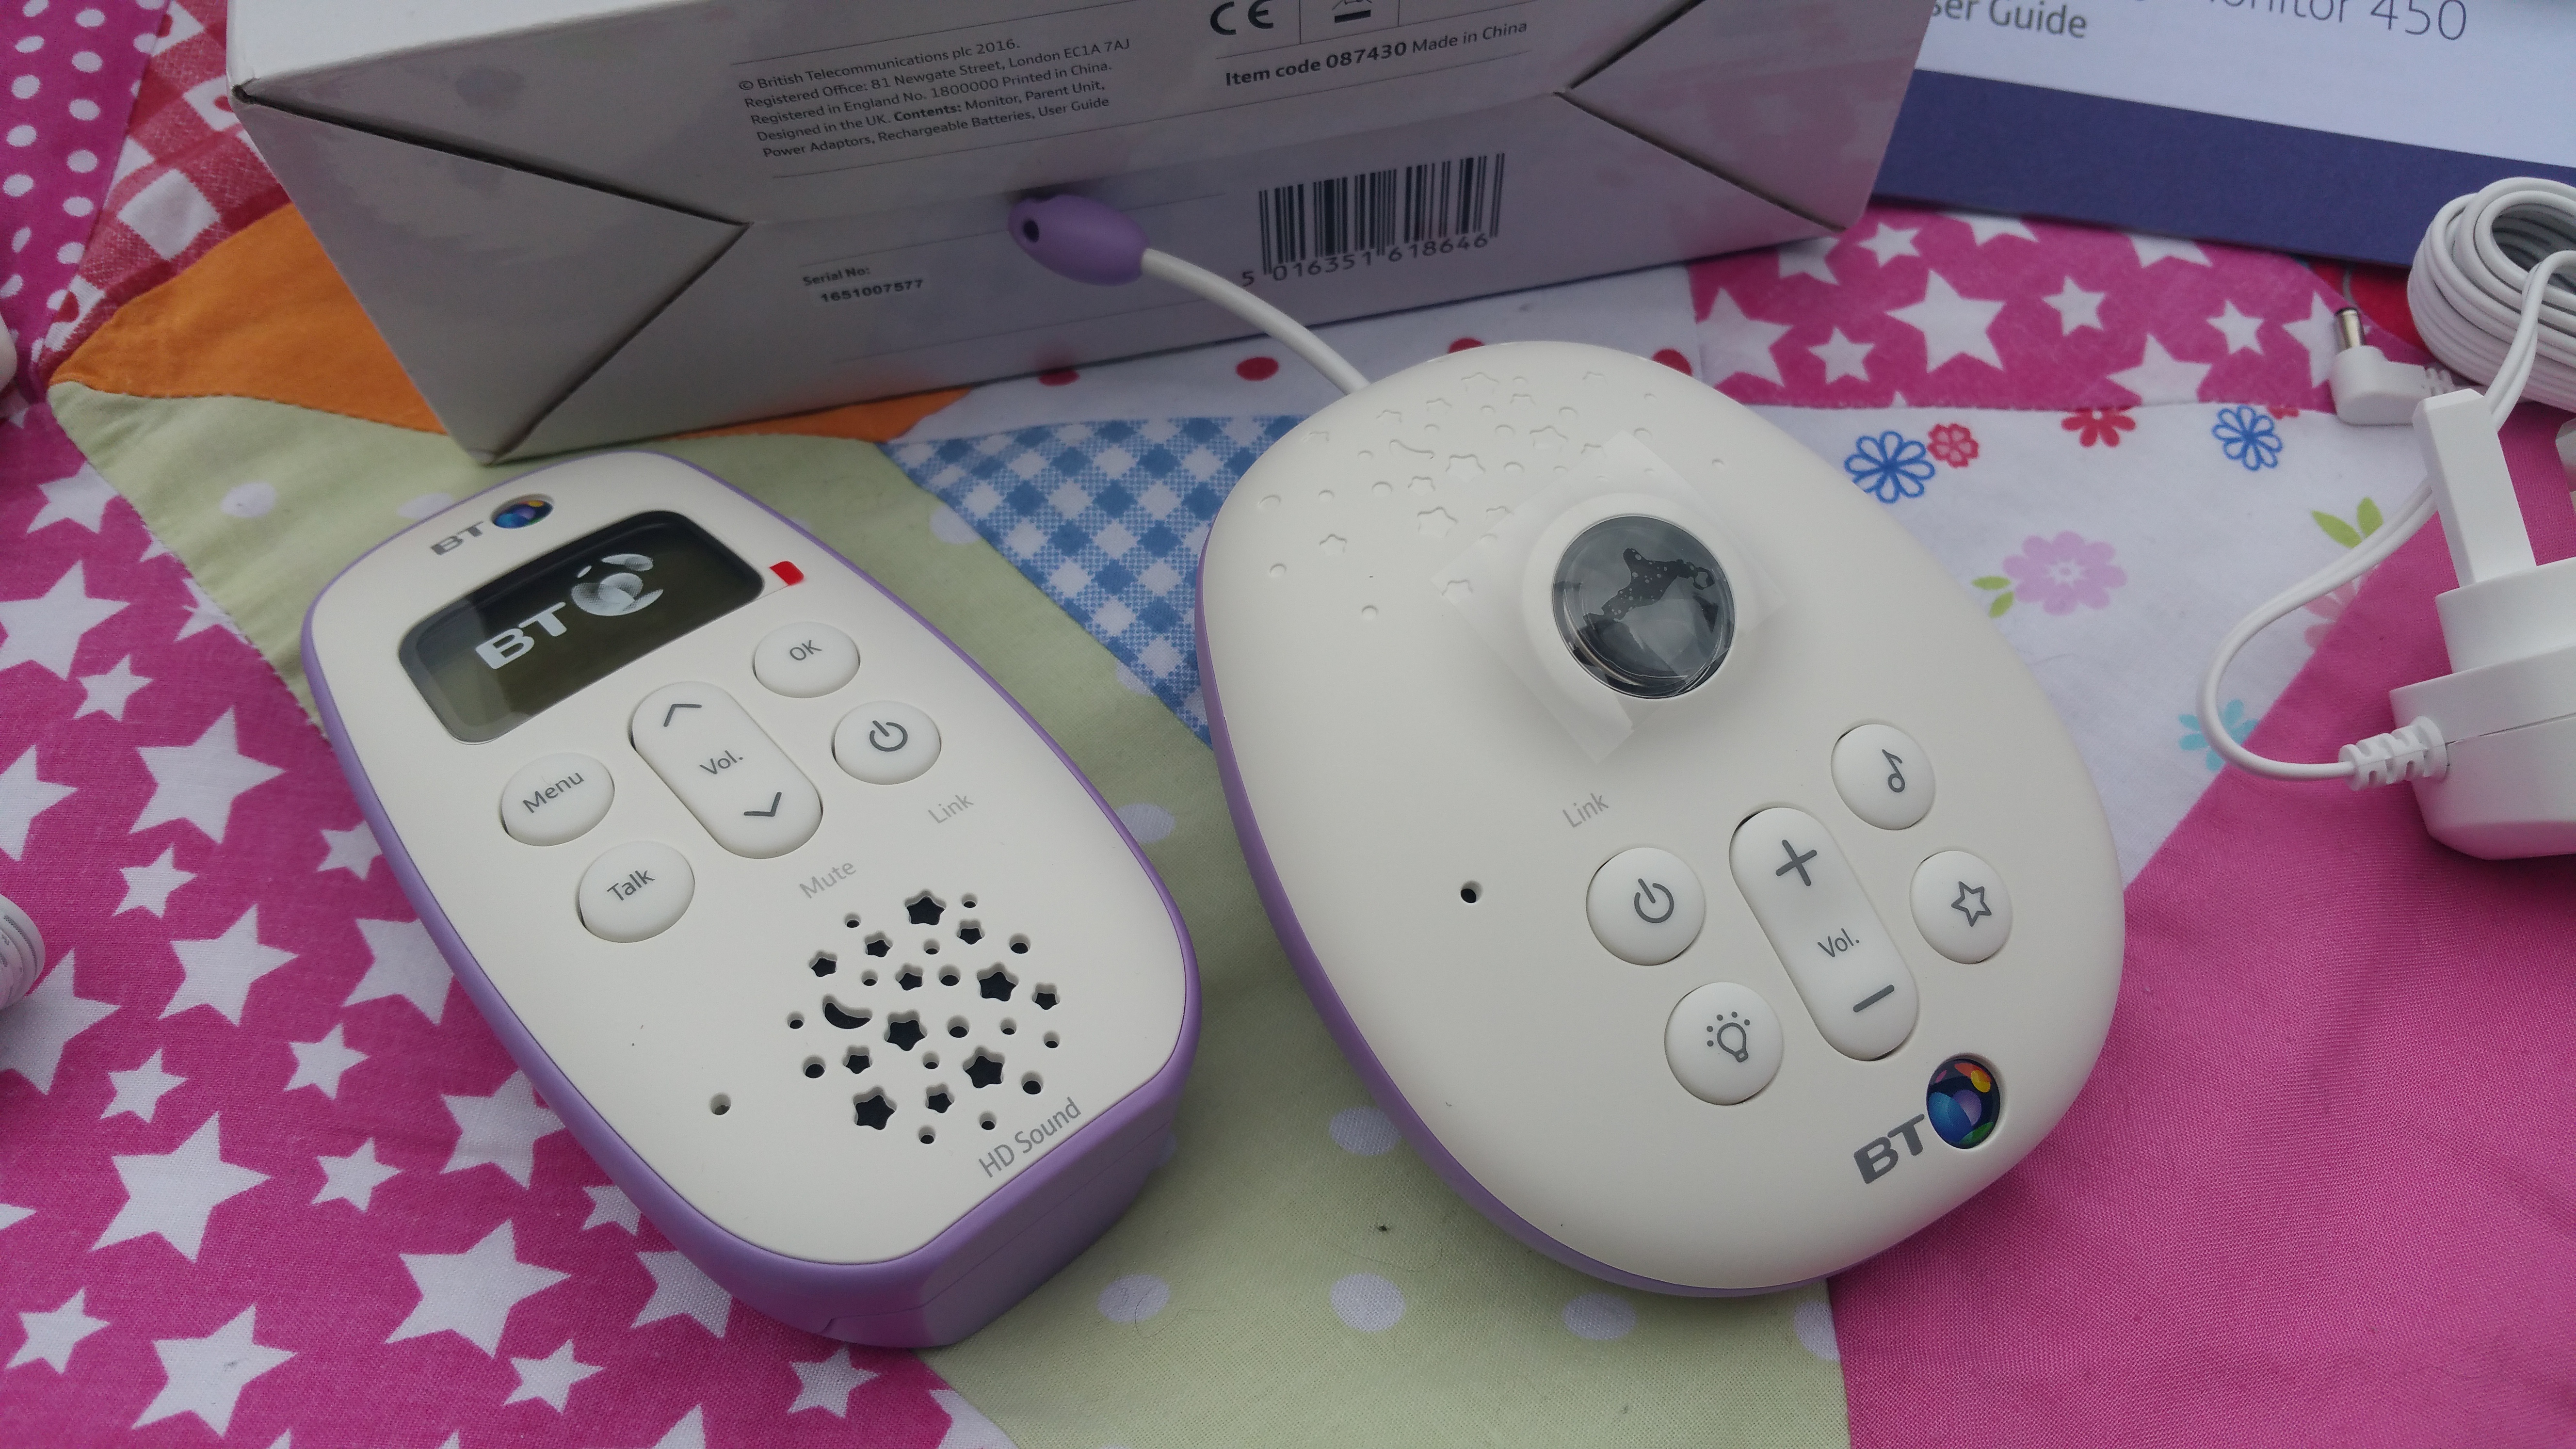 bt baby monitor 450 boots